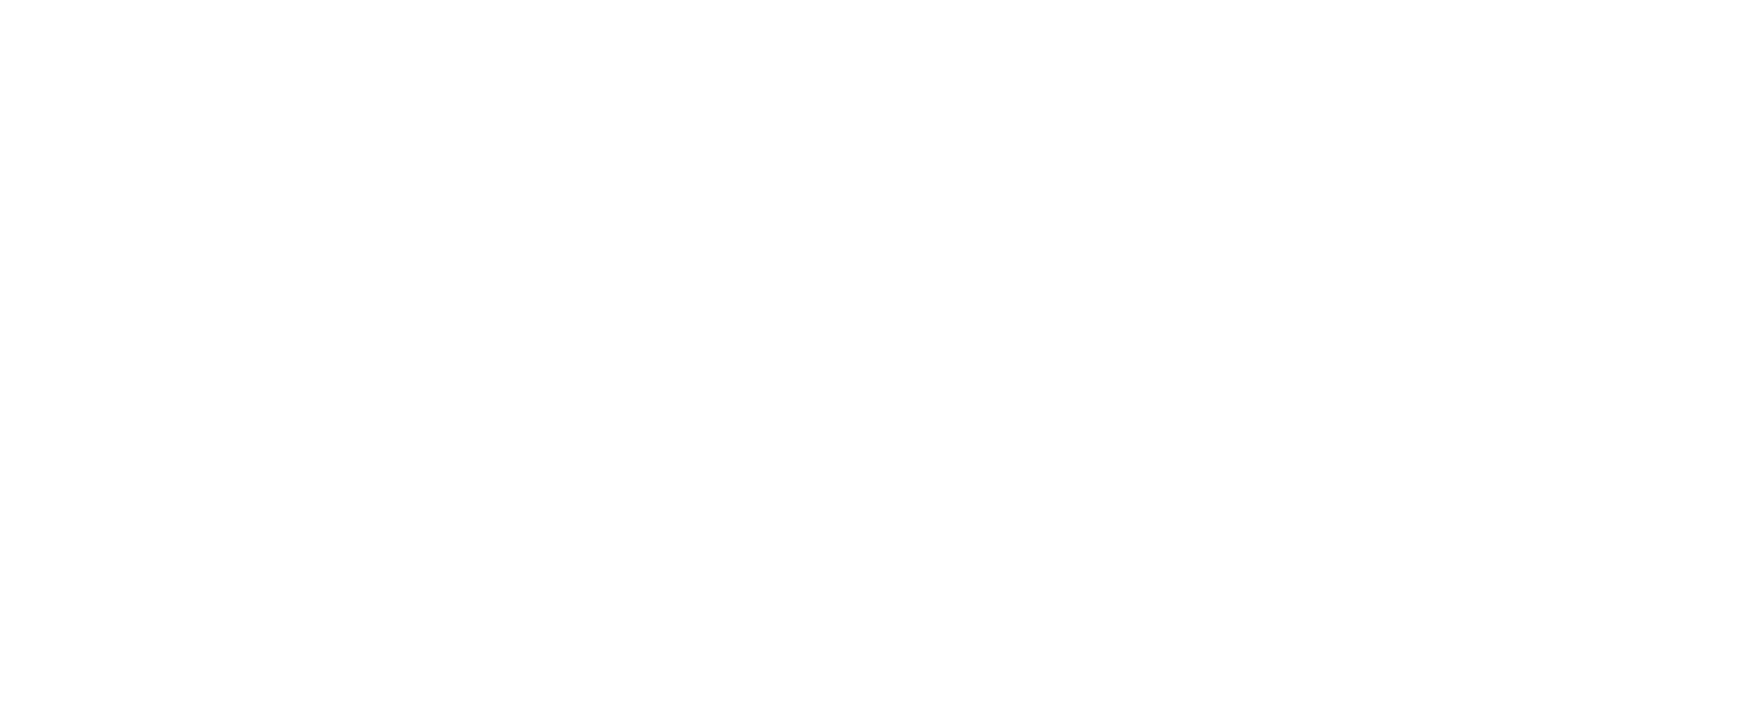 Ambitious Stockport, creating opportunities for everyone.